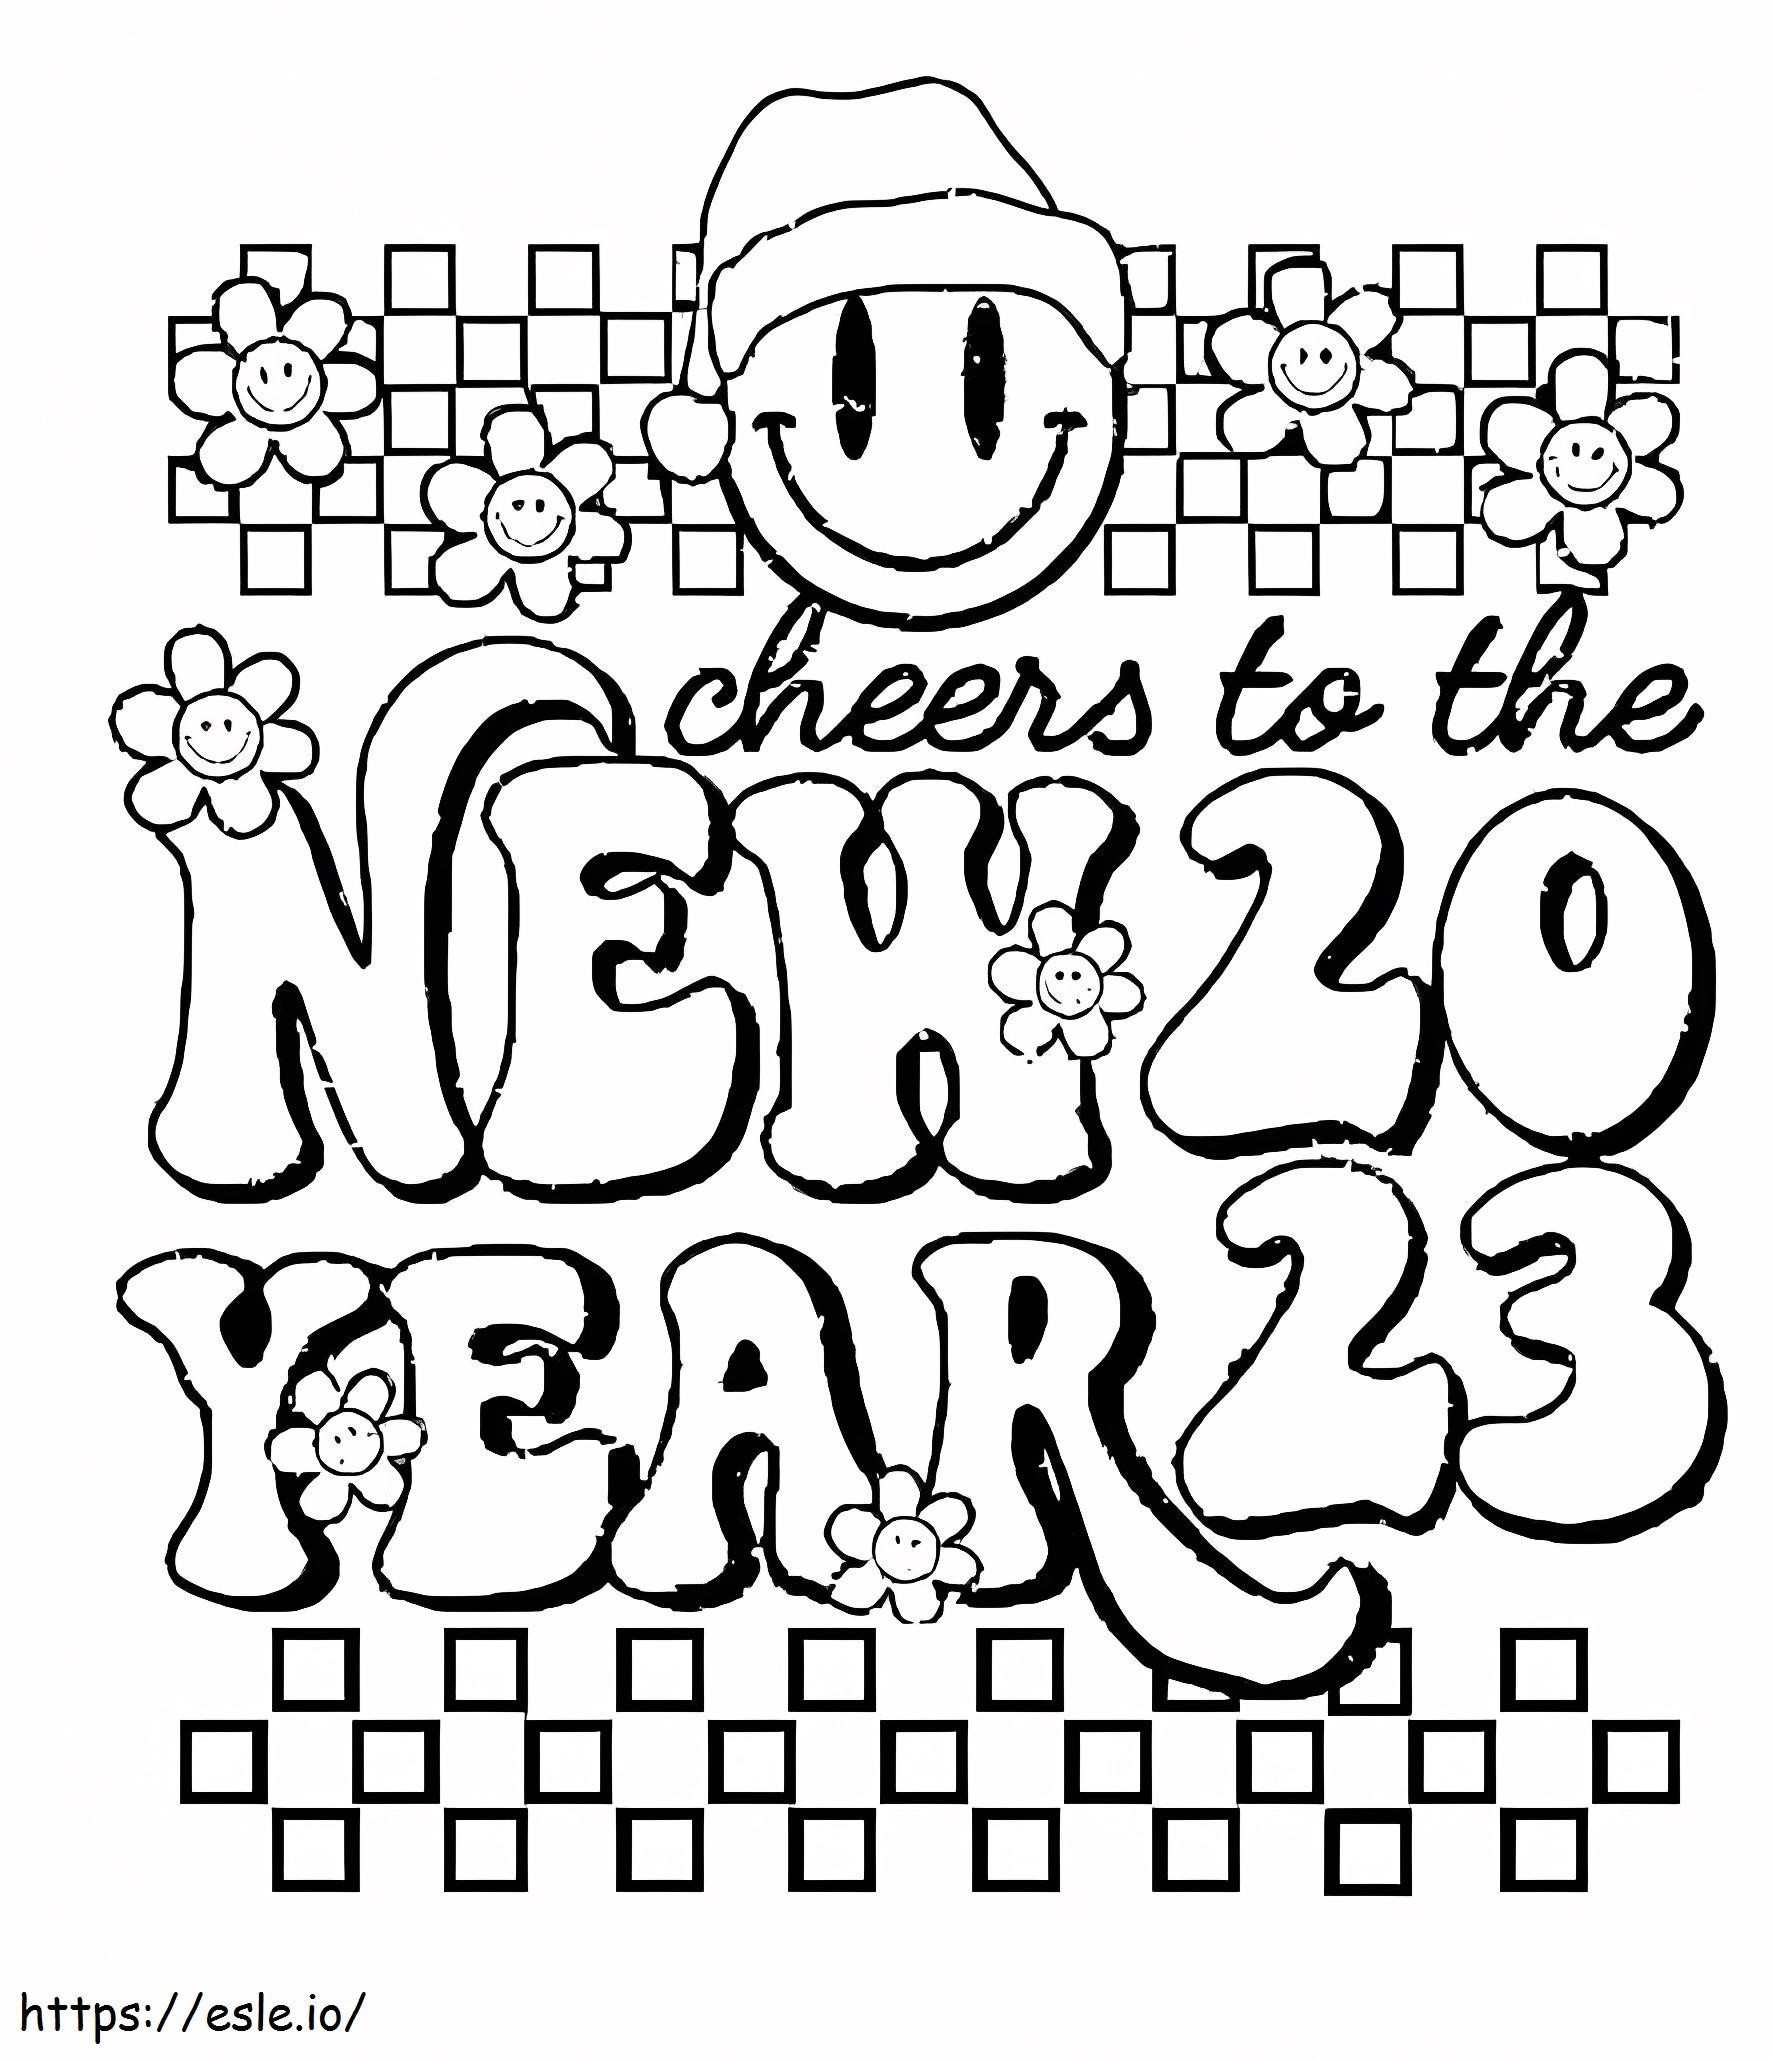 Cheers To The New Year 2023 coloring page